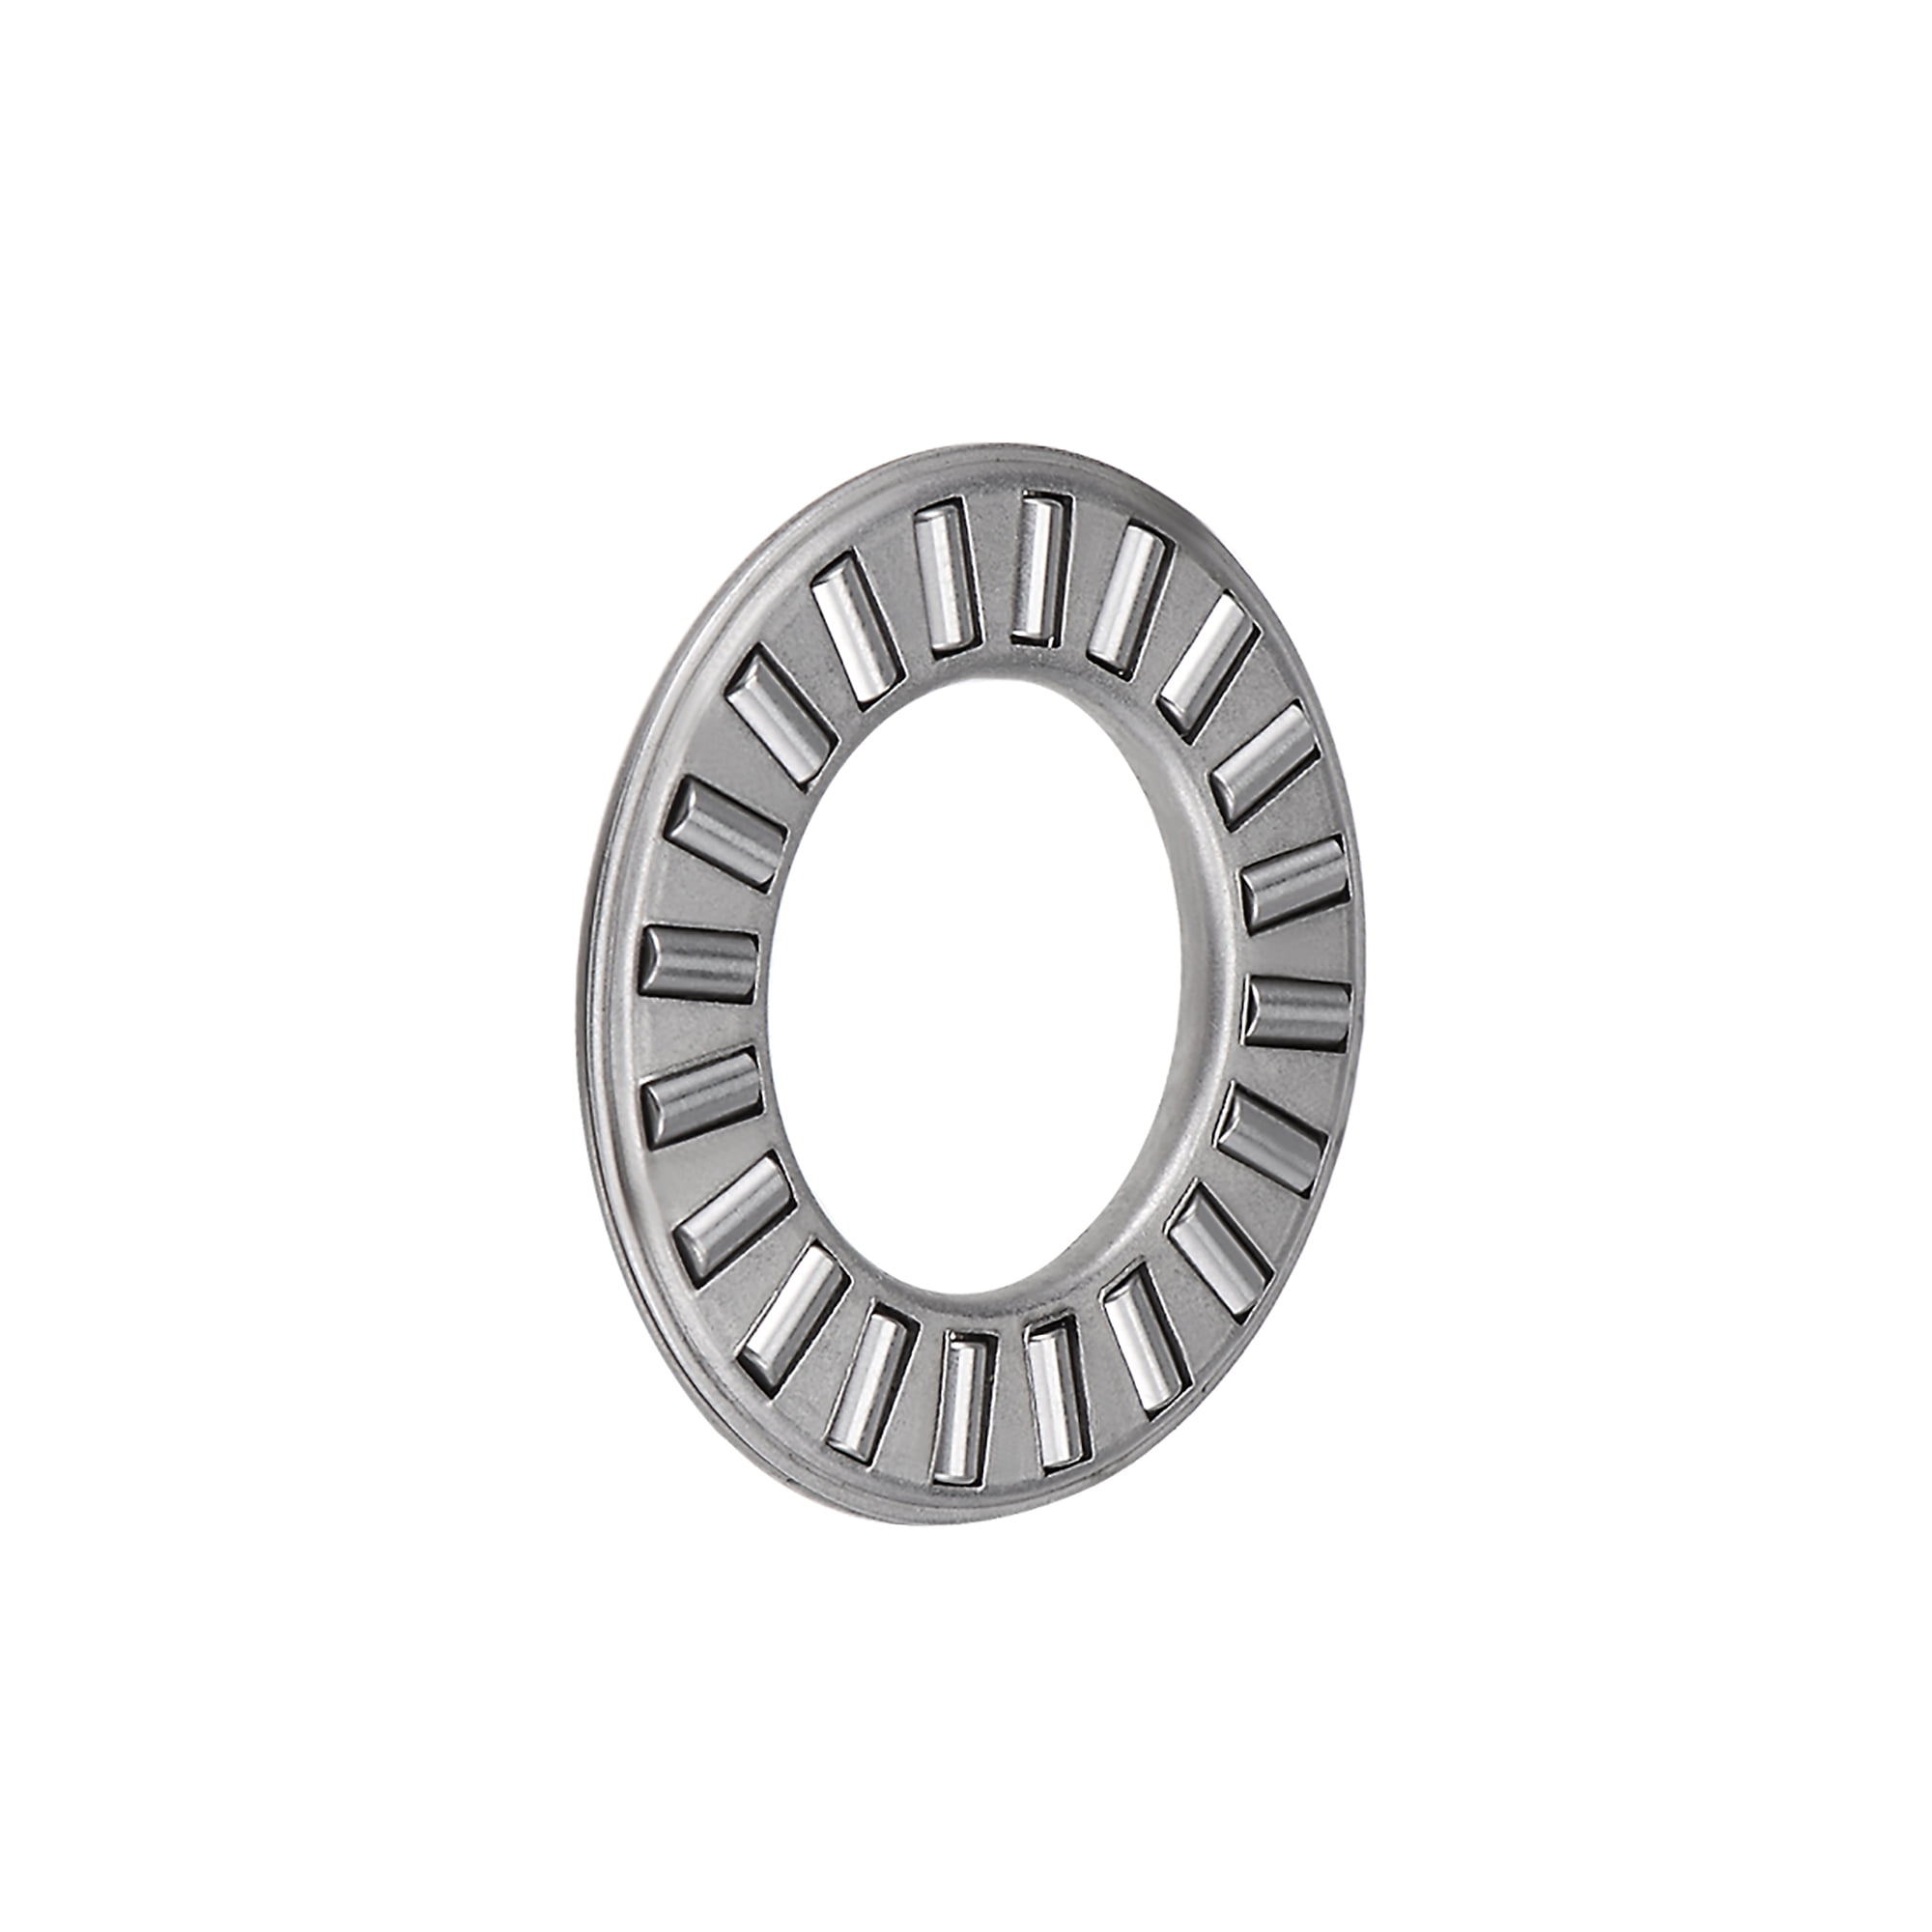 NTA1018 Thrust Needle Roller Bearings 5/8 x 1-1/8 x 5/64-inch with Washer 2pcs 